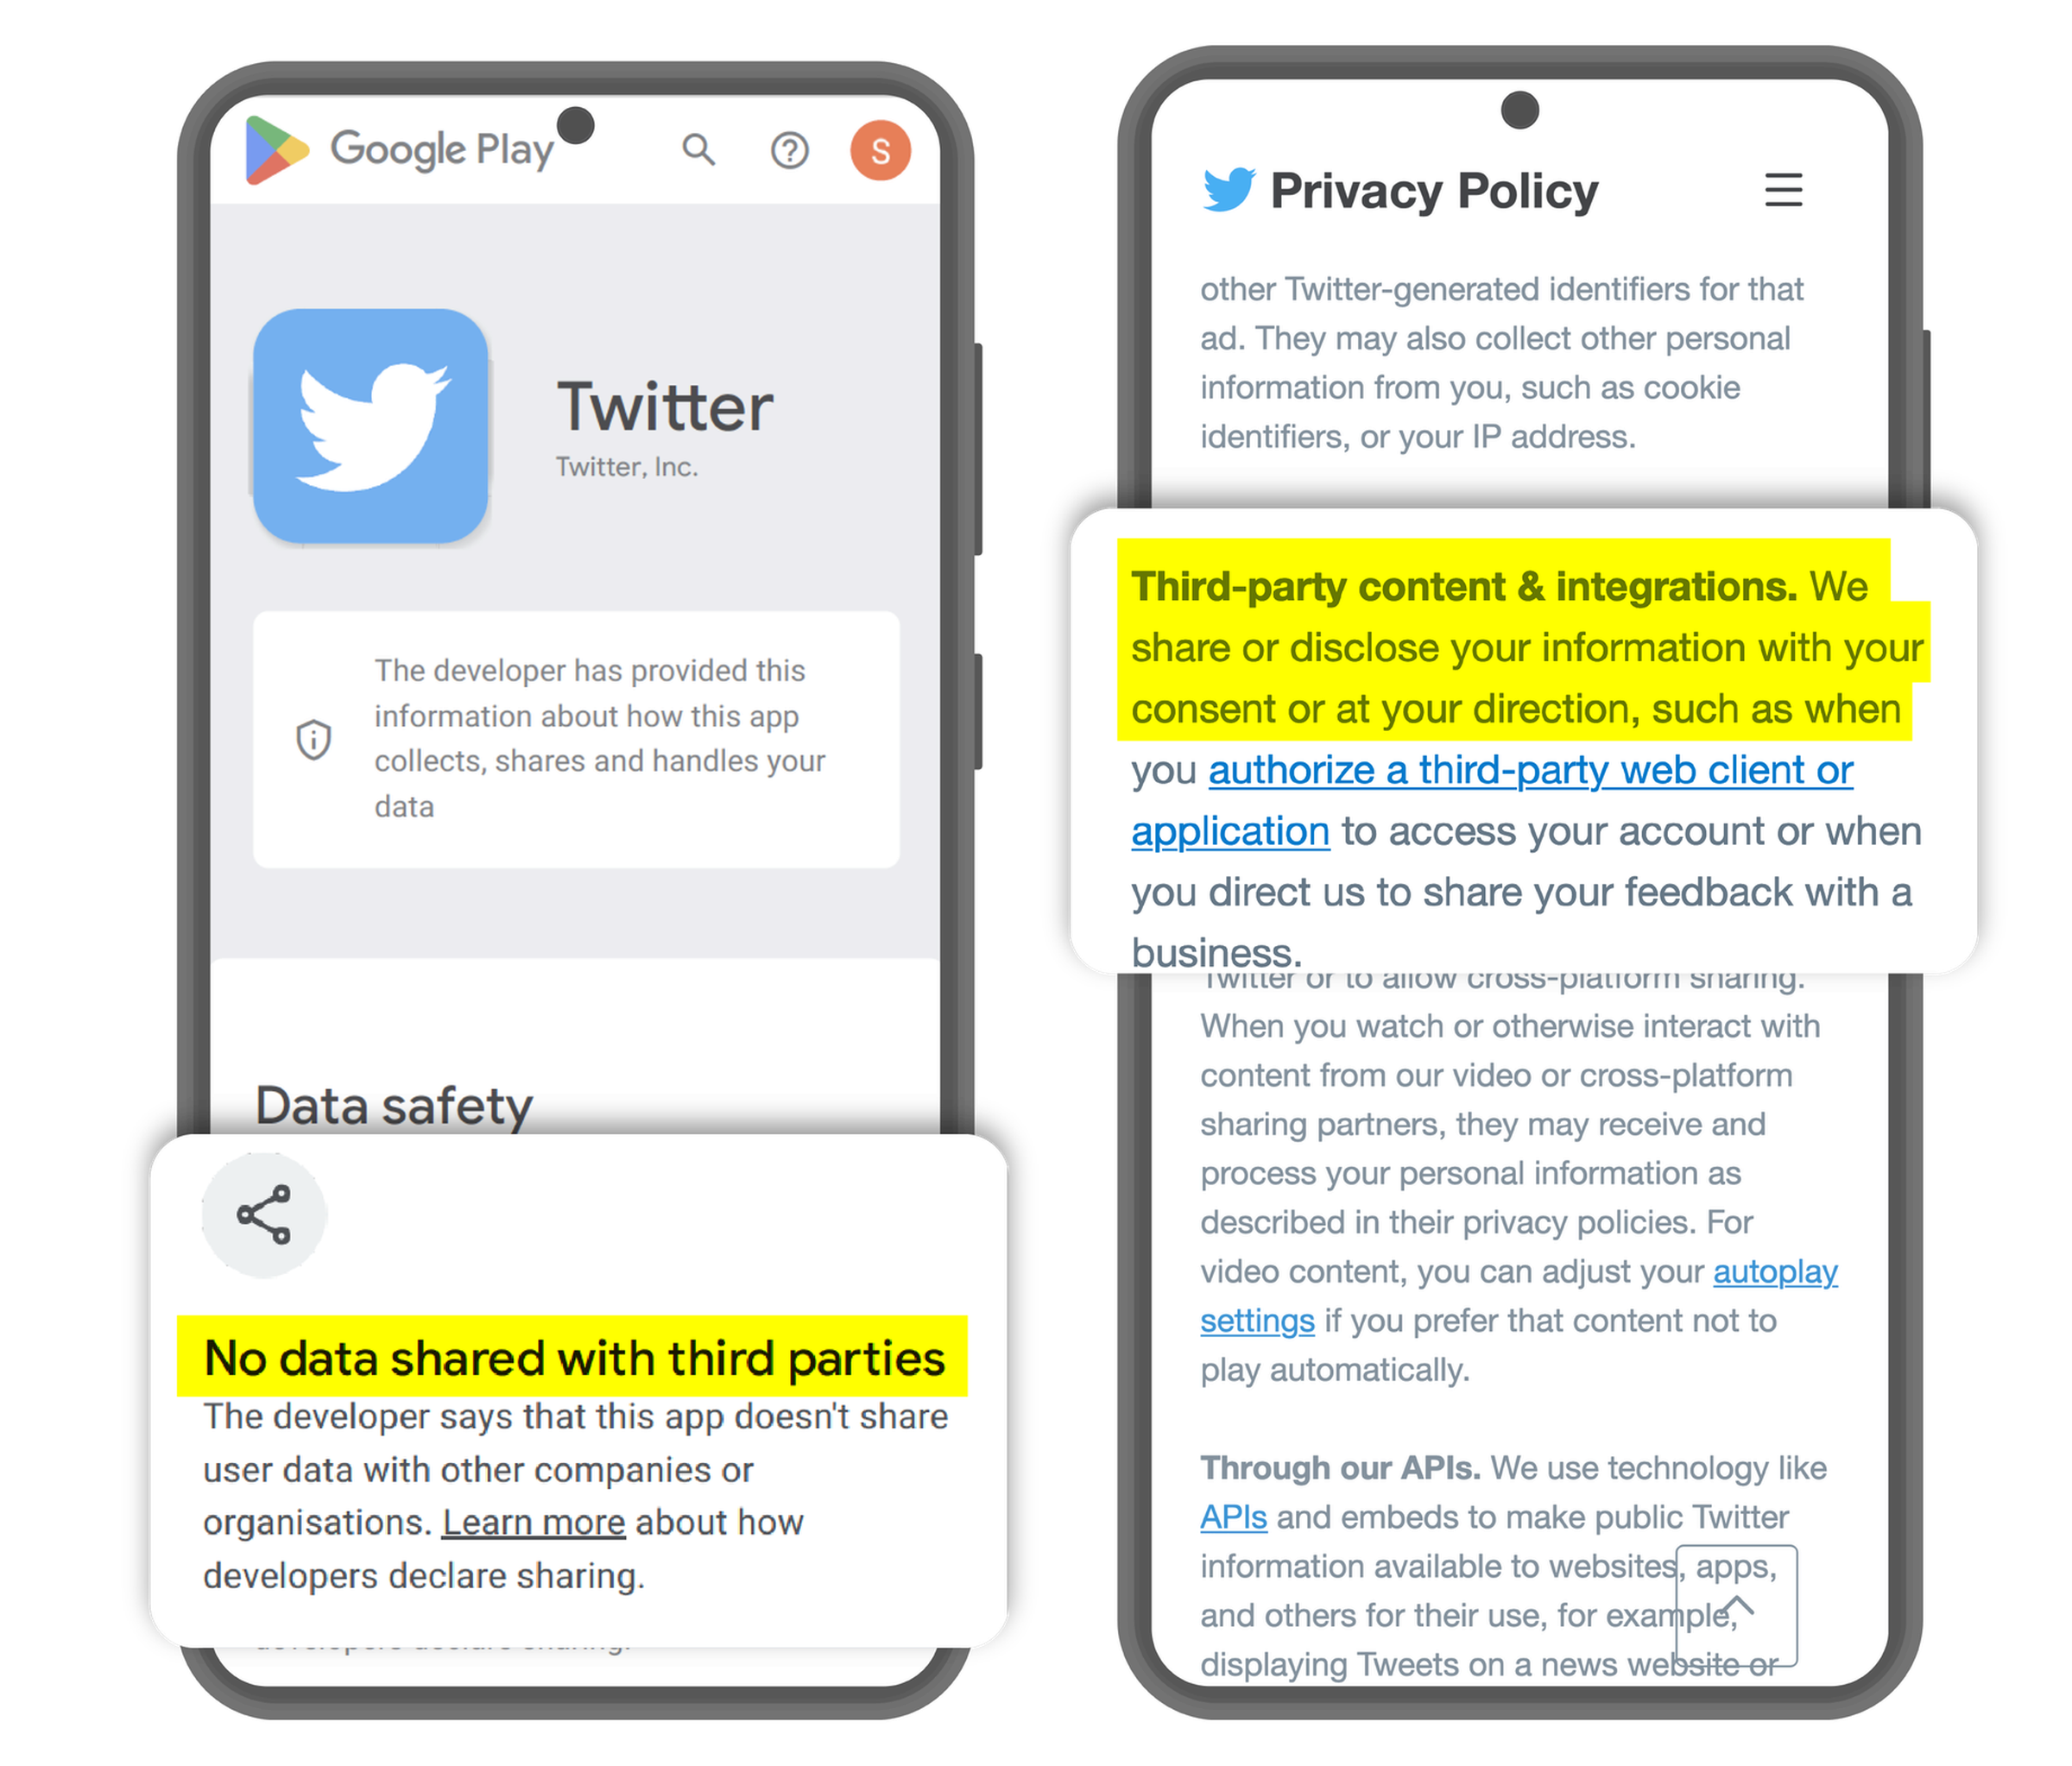 Two mobile phones. On the left, the display shows the Twitter app on the Google Play store claiming to not share data with third parties. On the right, Twitter’s privacy policy instead does disclose that it shares data with third parties.